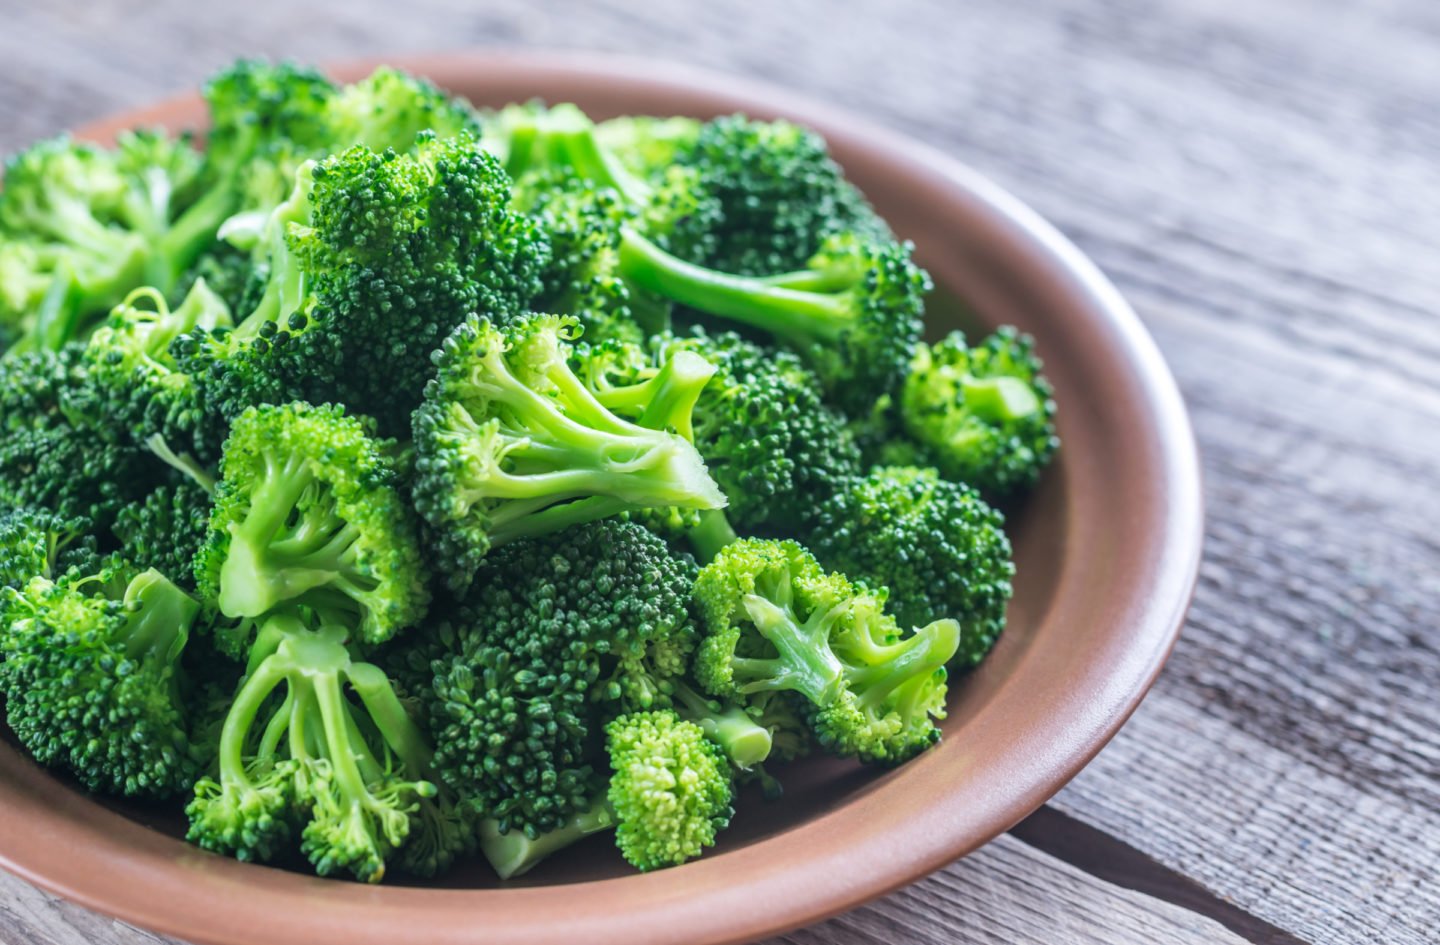 steamed or blanched broccoli florets